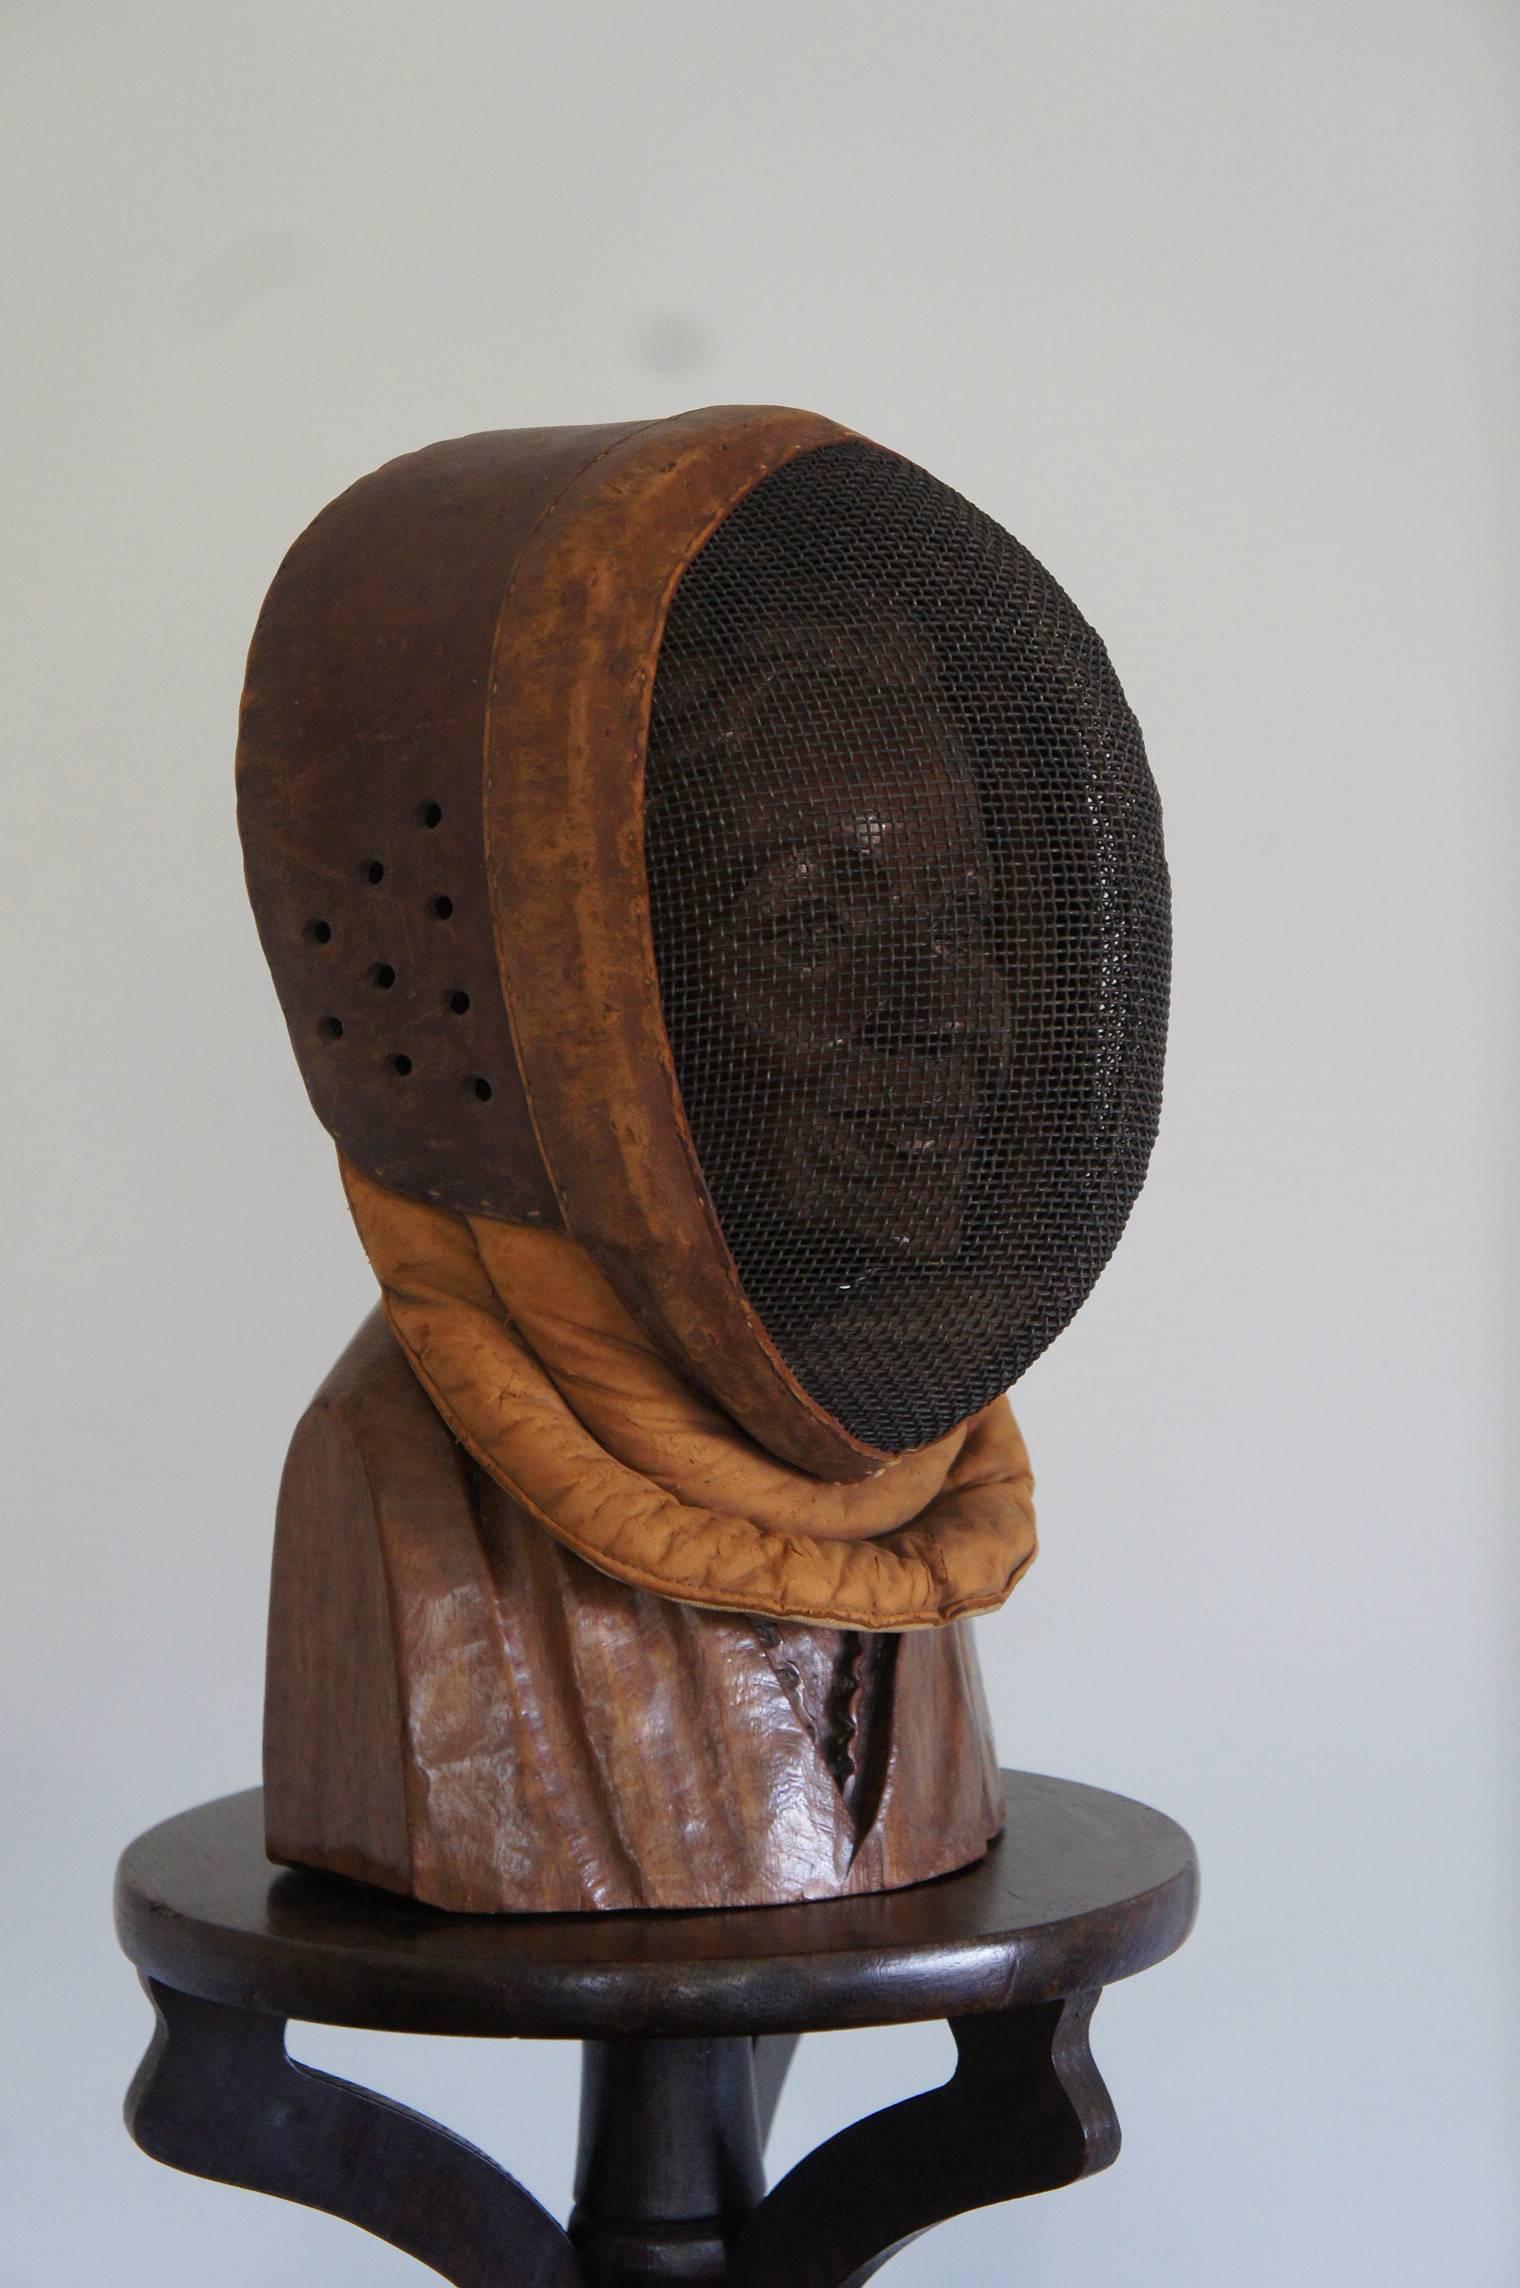 A great decorator's piece at an even better price.

If fencing is your passion then you could not wish for a more beautiful artefact than this 1920's leather fencing mask. And even if you are not a fan of the sport, this also makes a stylish and